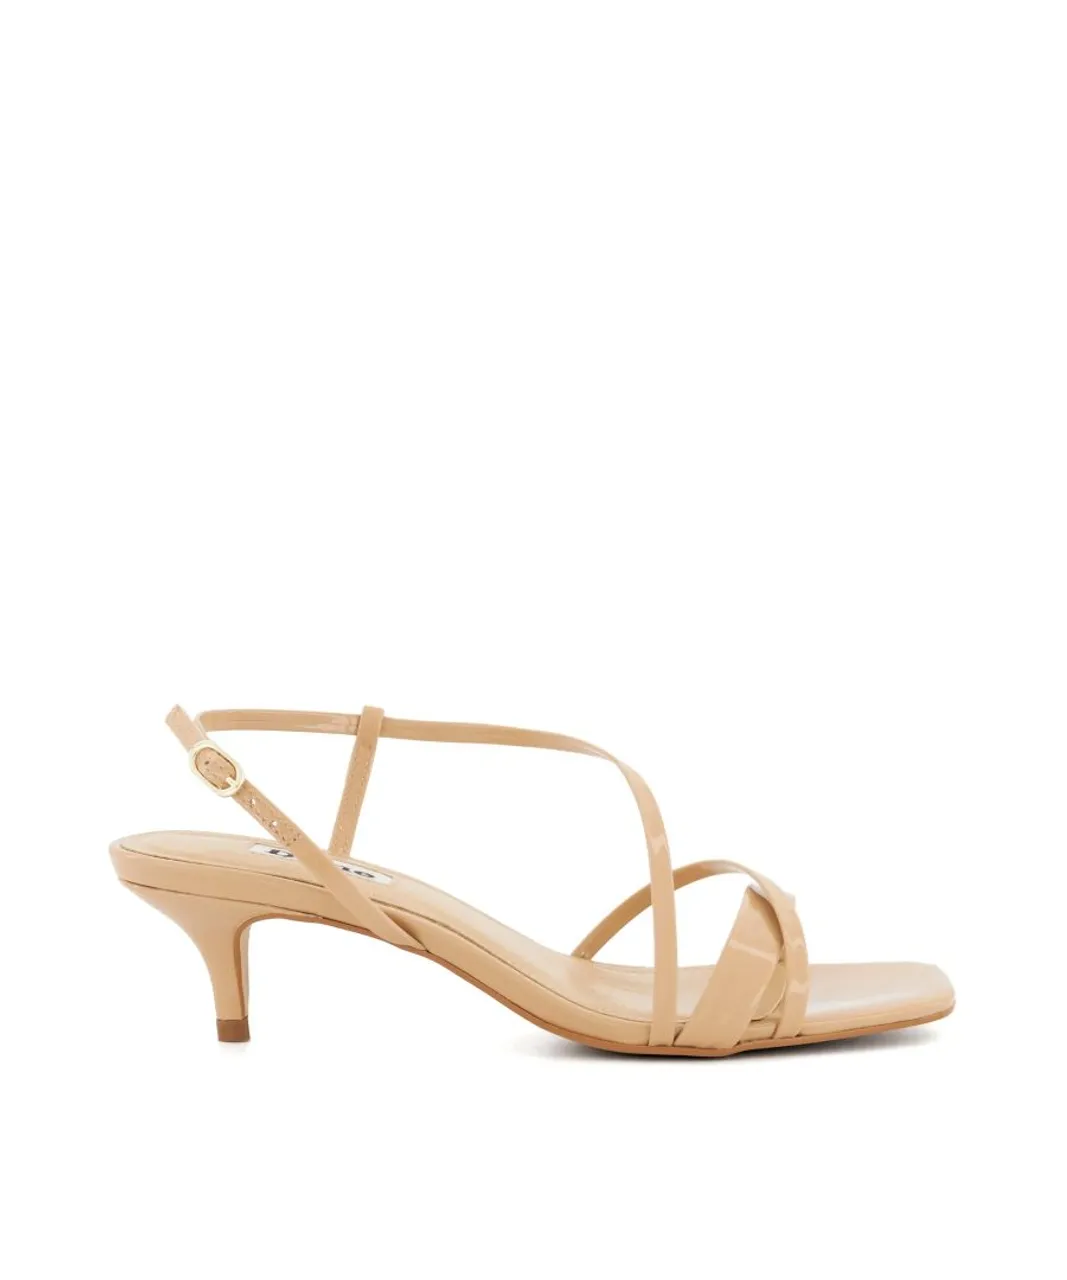 Dune London Womens Ladies Madely - Strappy Leather Kitten-Heel Sandals - Nude Leather (archived)